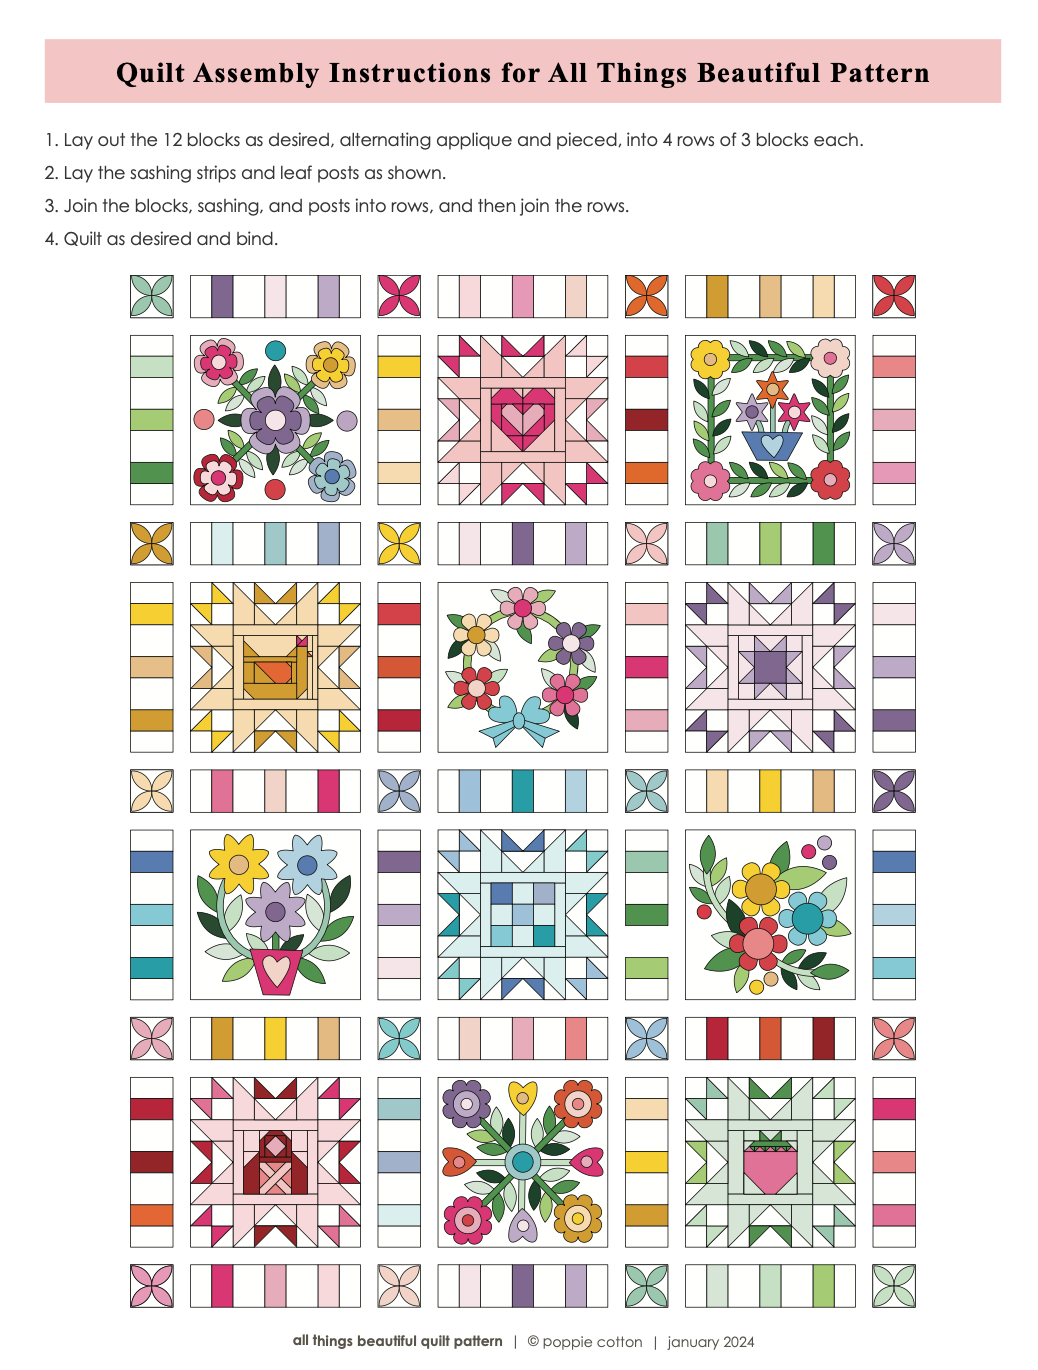 All Things Beautiful Pattern Quilt Assembly Sheet - Free Download